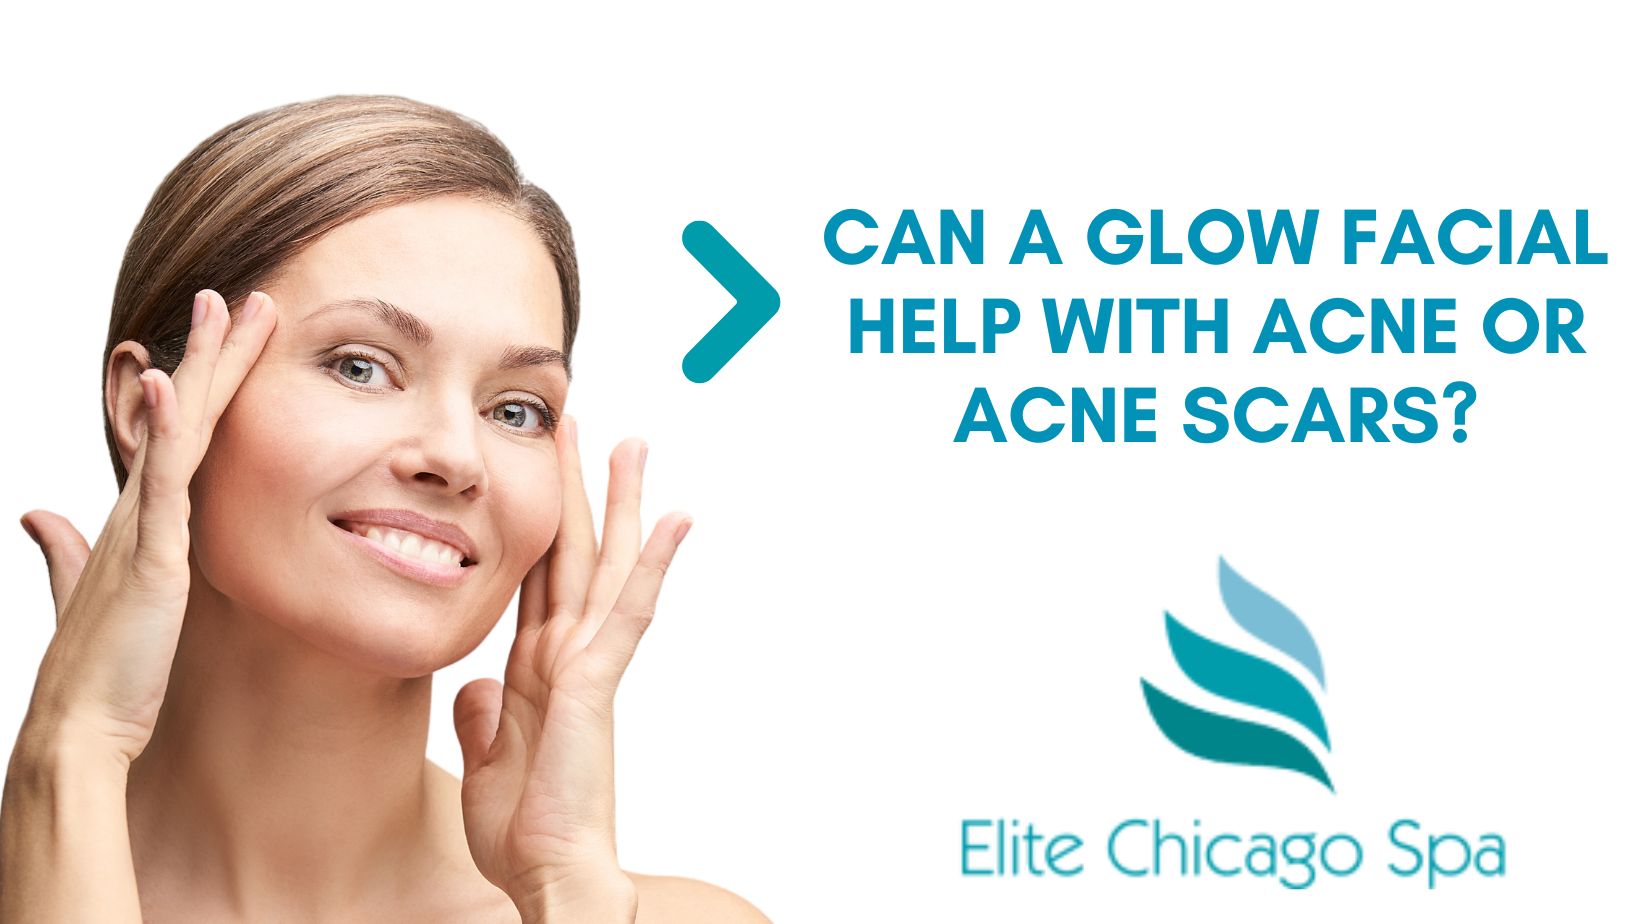 Read more about the article Can A Glow Facial Help With Acne Or Acne Scars?